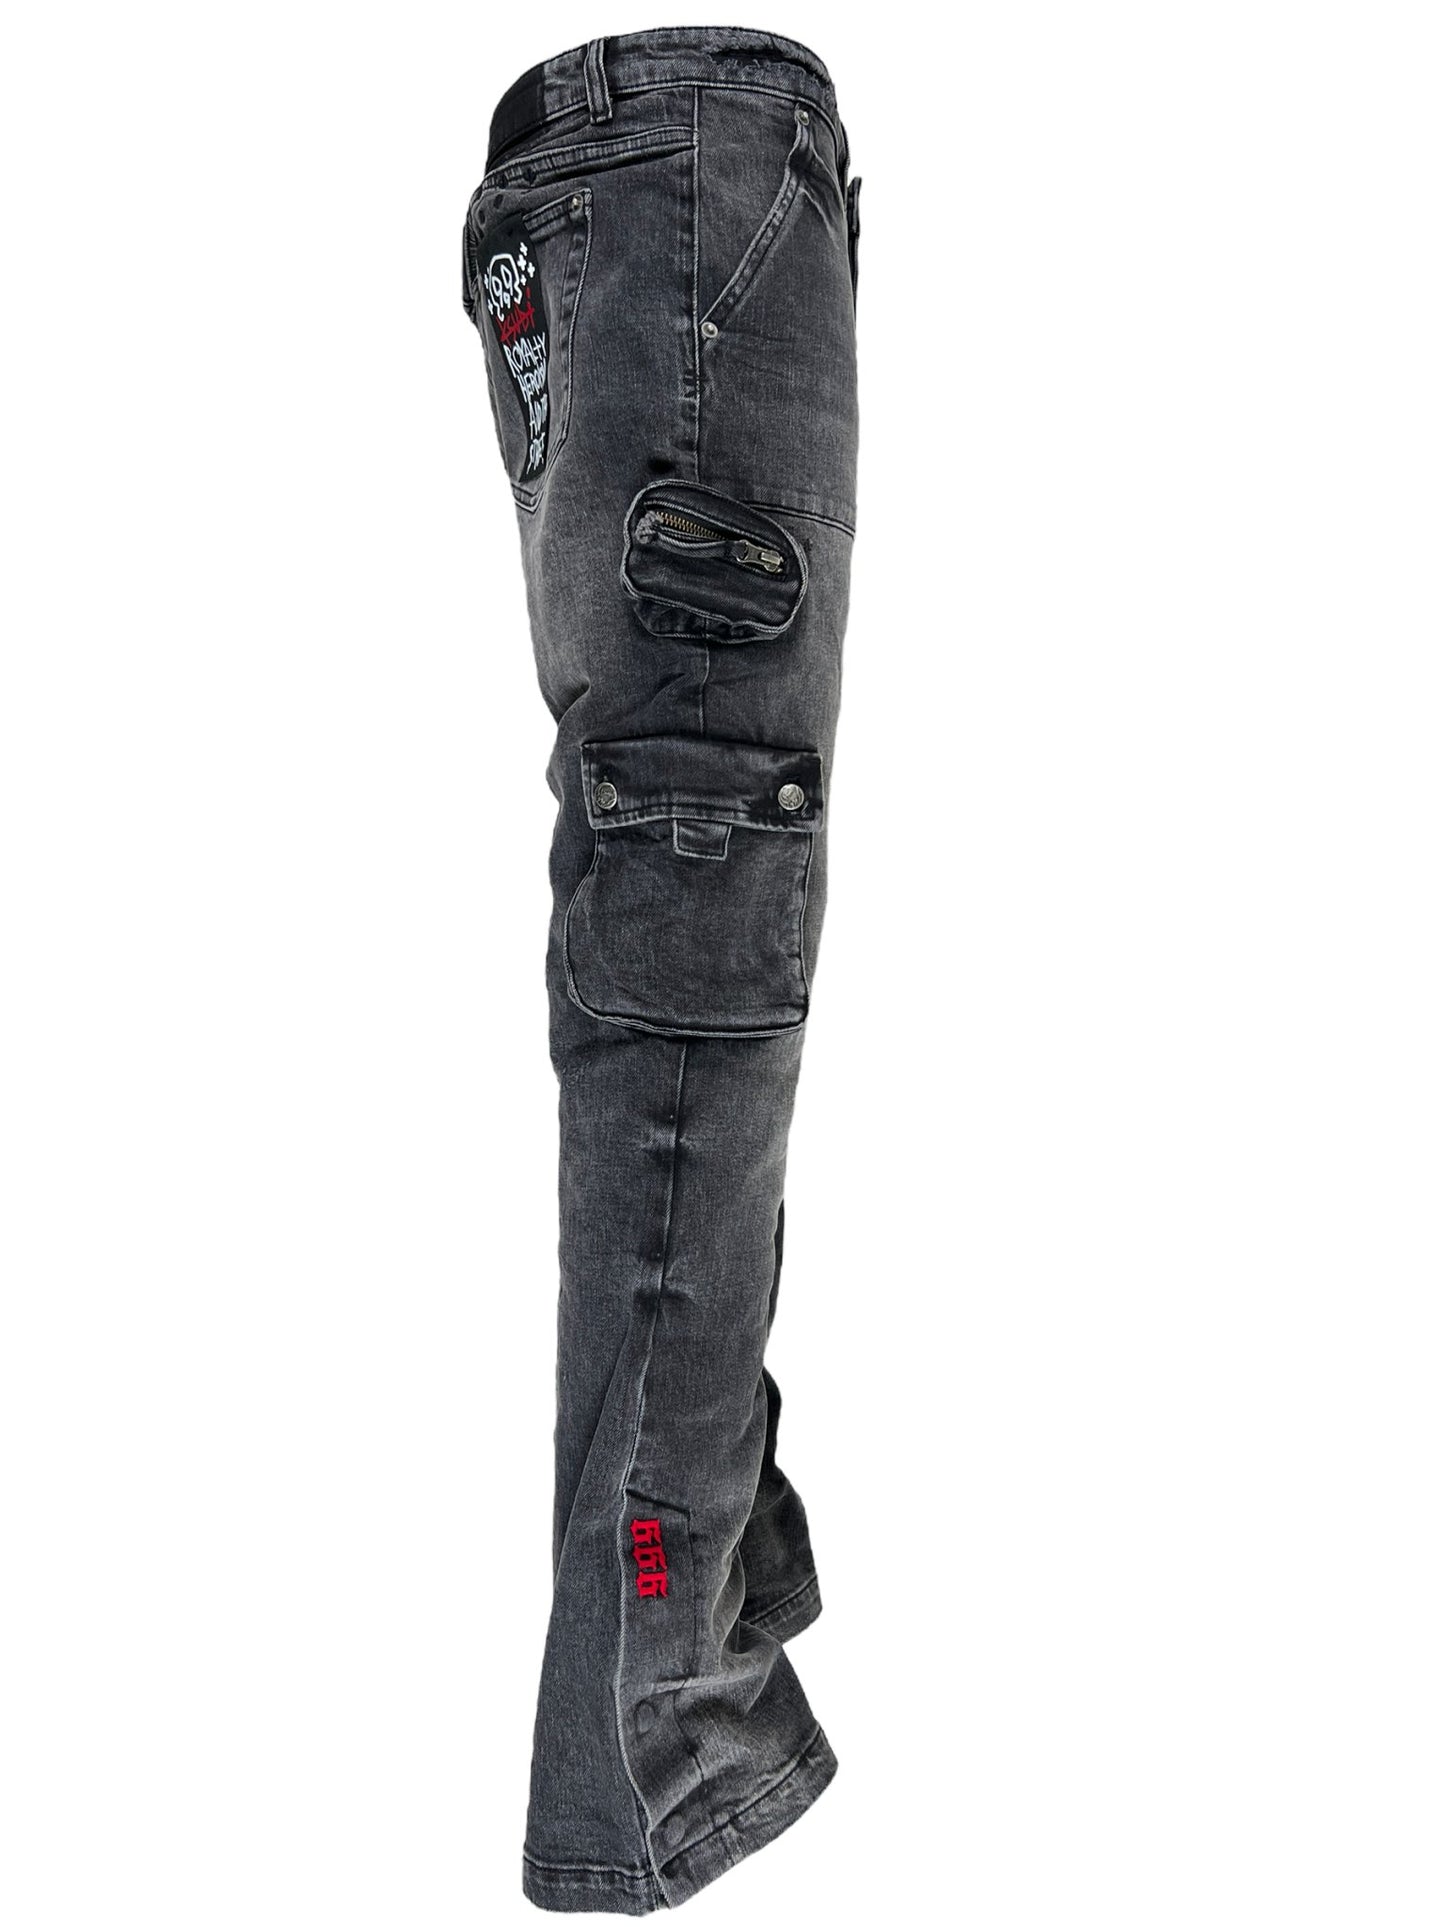 A pair of Ksubi 999 Bronko Cargo black jeans with embroidery branding and a red patch on the back.